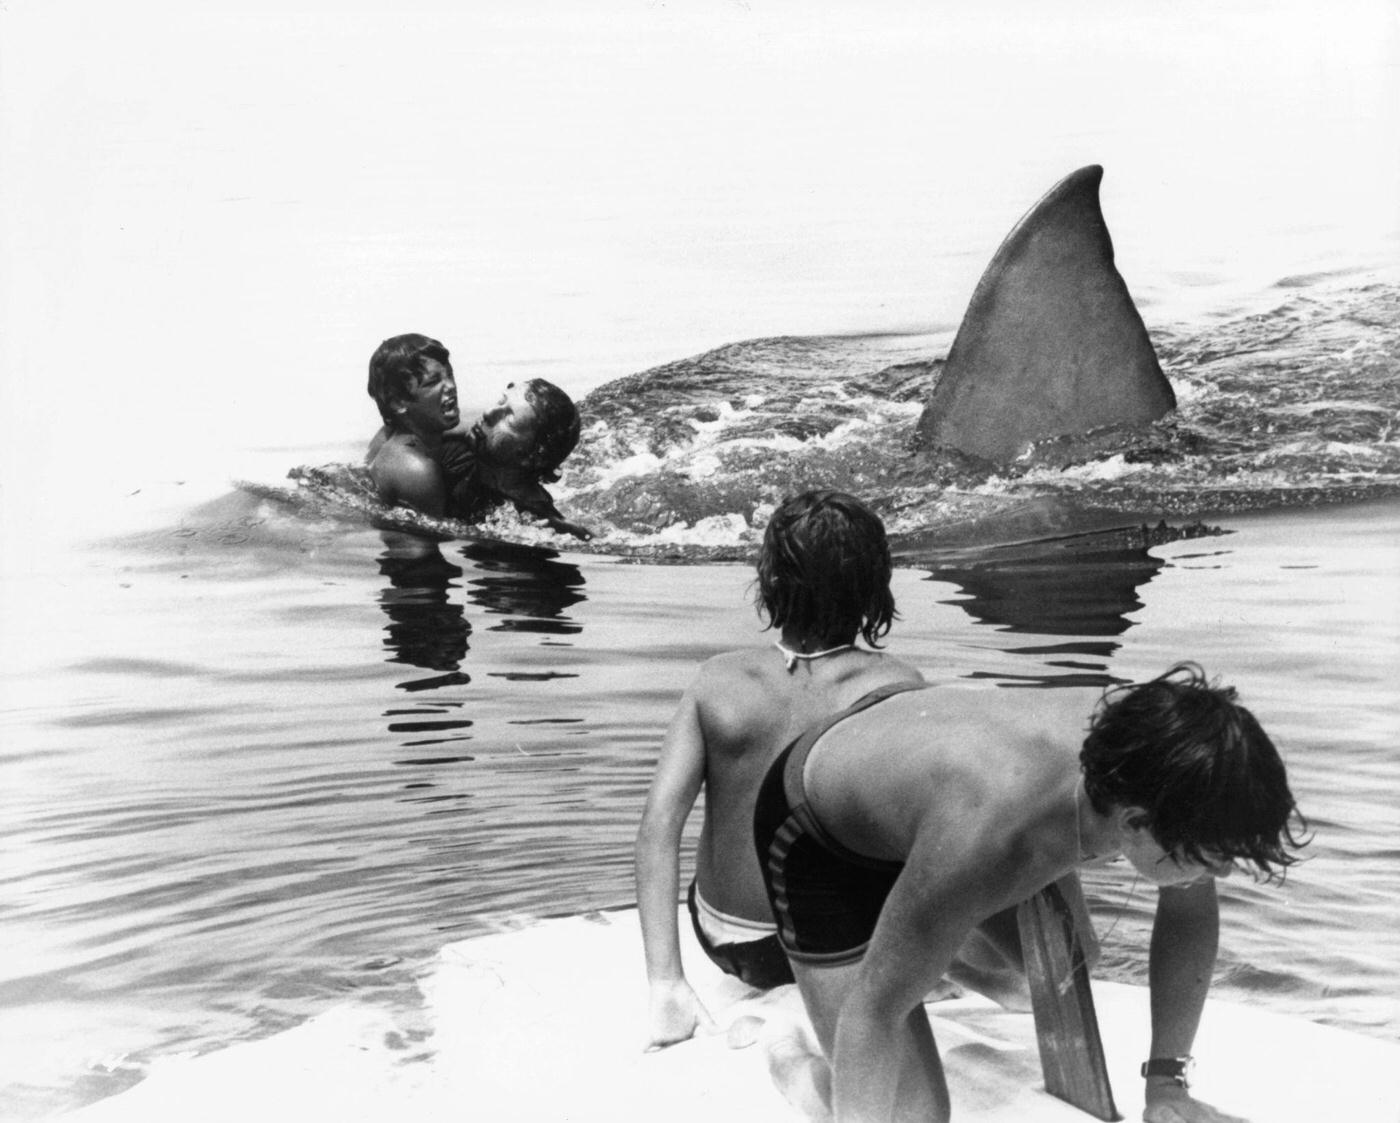 Boys attempt to escape the shark in a scene from the film 'Jaws', 1975.